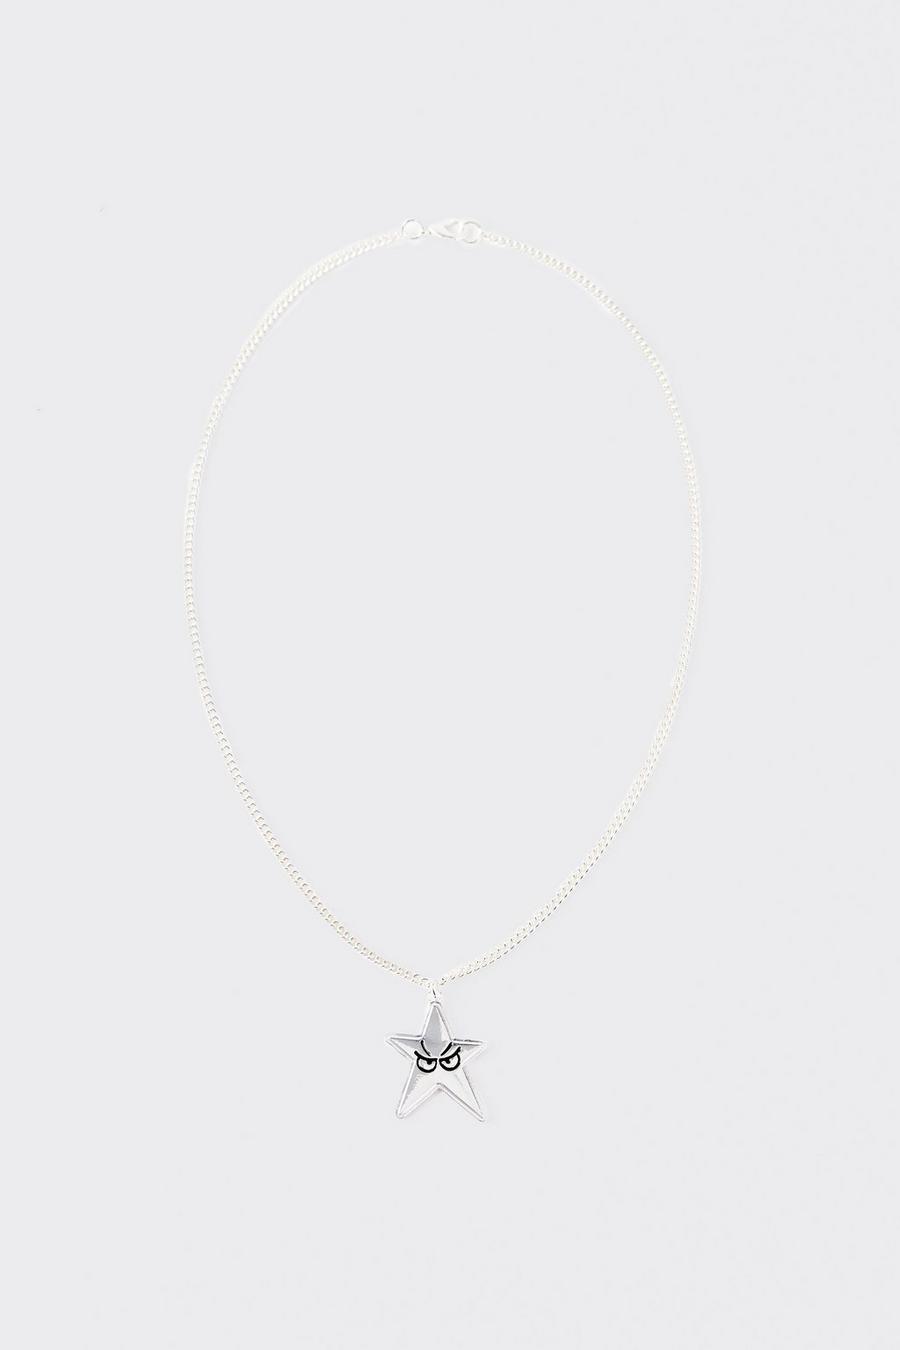 Silver Star Necklace 